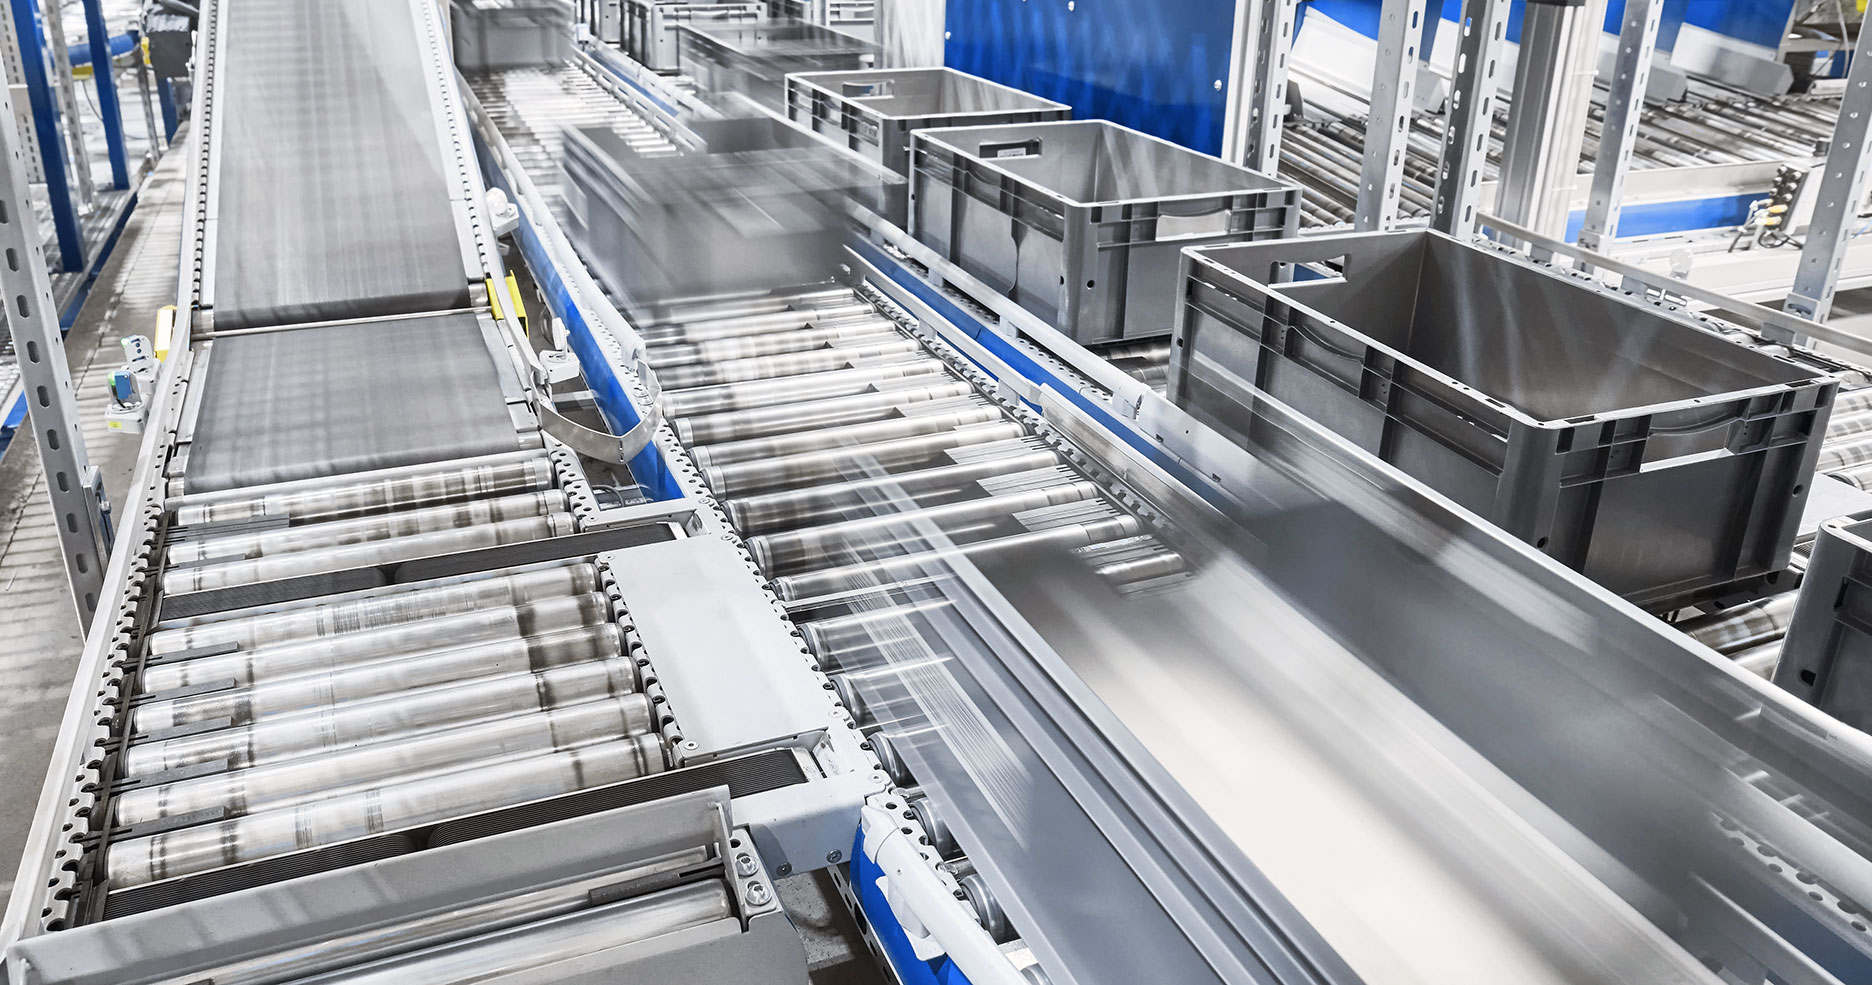 modern-conveyor-system-with-boxes-in-motion-2021-08-27-10-14-48-utc_sm